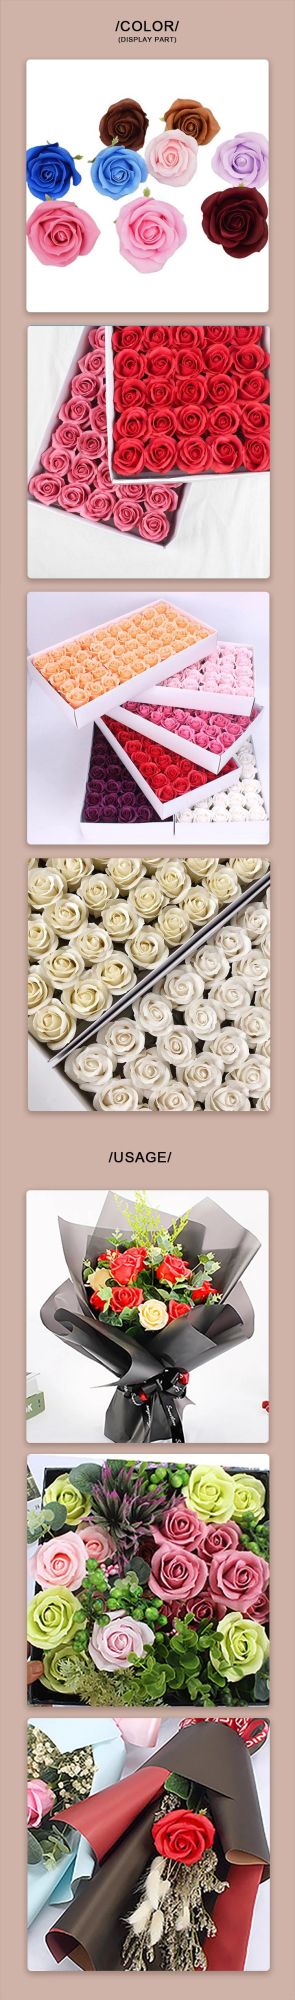 New Arrive 2021 Hot Selling Cold Beauty Roses Forever Roses Flower Boxes Best Gift Valentines Gifts